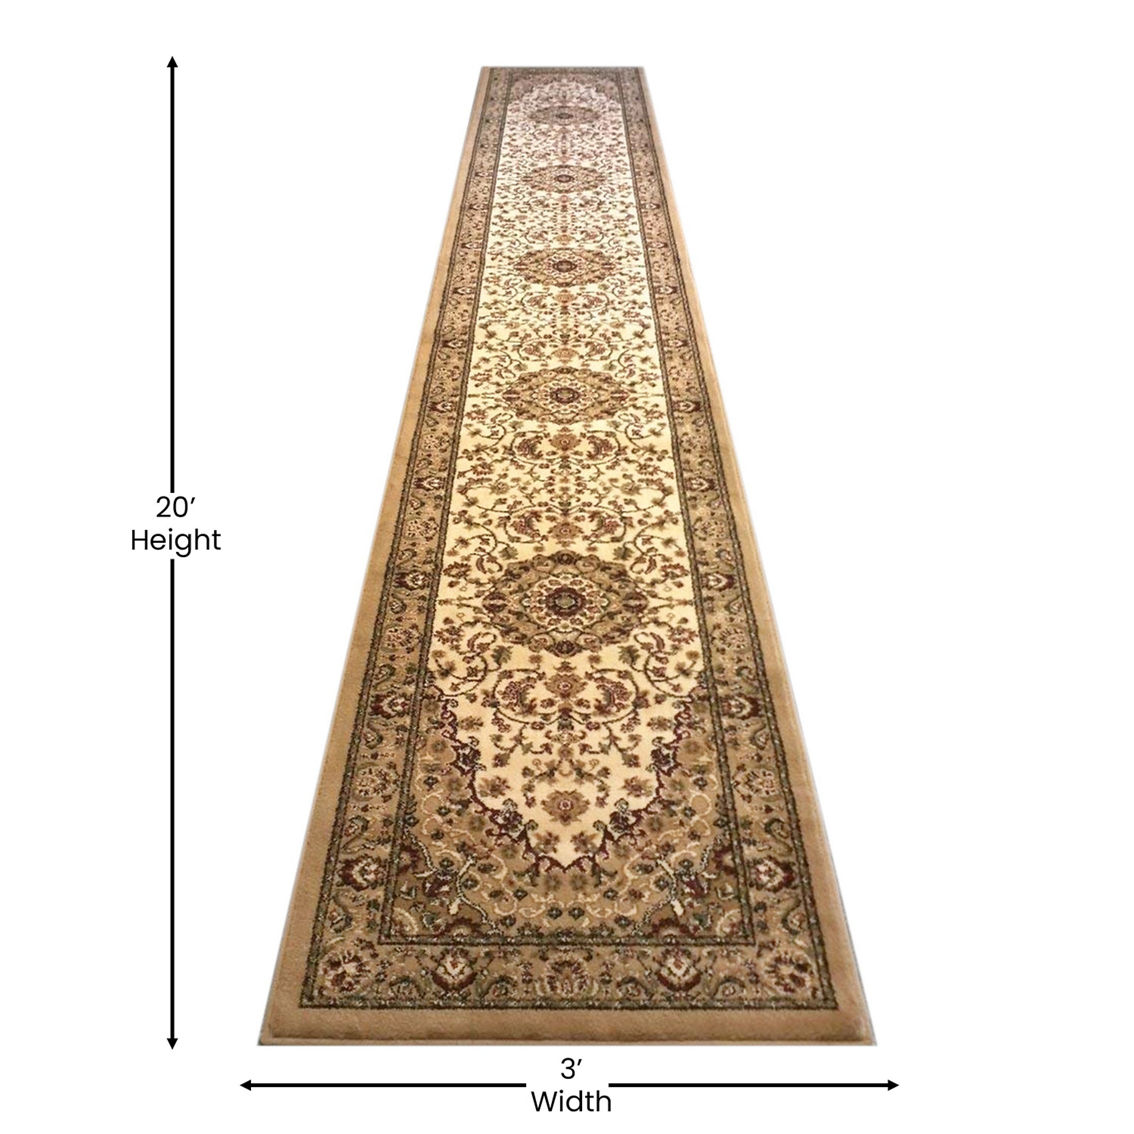 Flash Furniture 3' x 20' Traditional Persian Style Area Rug - Image 5 of 5